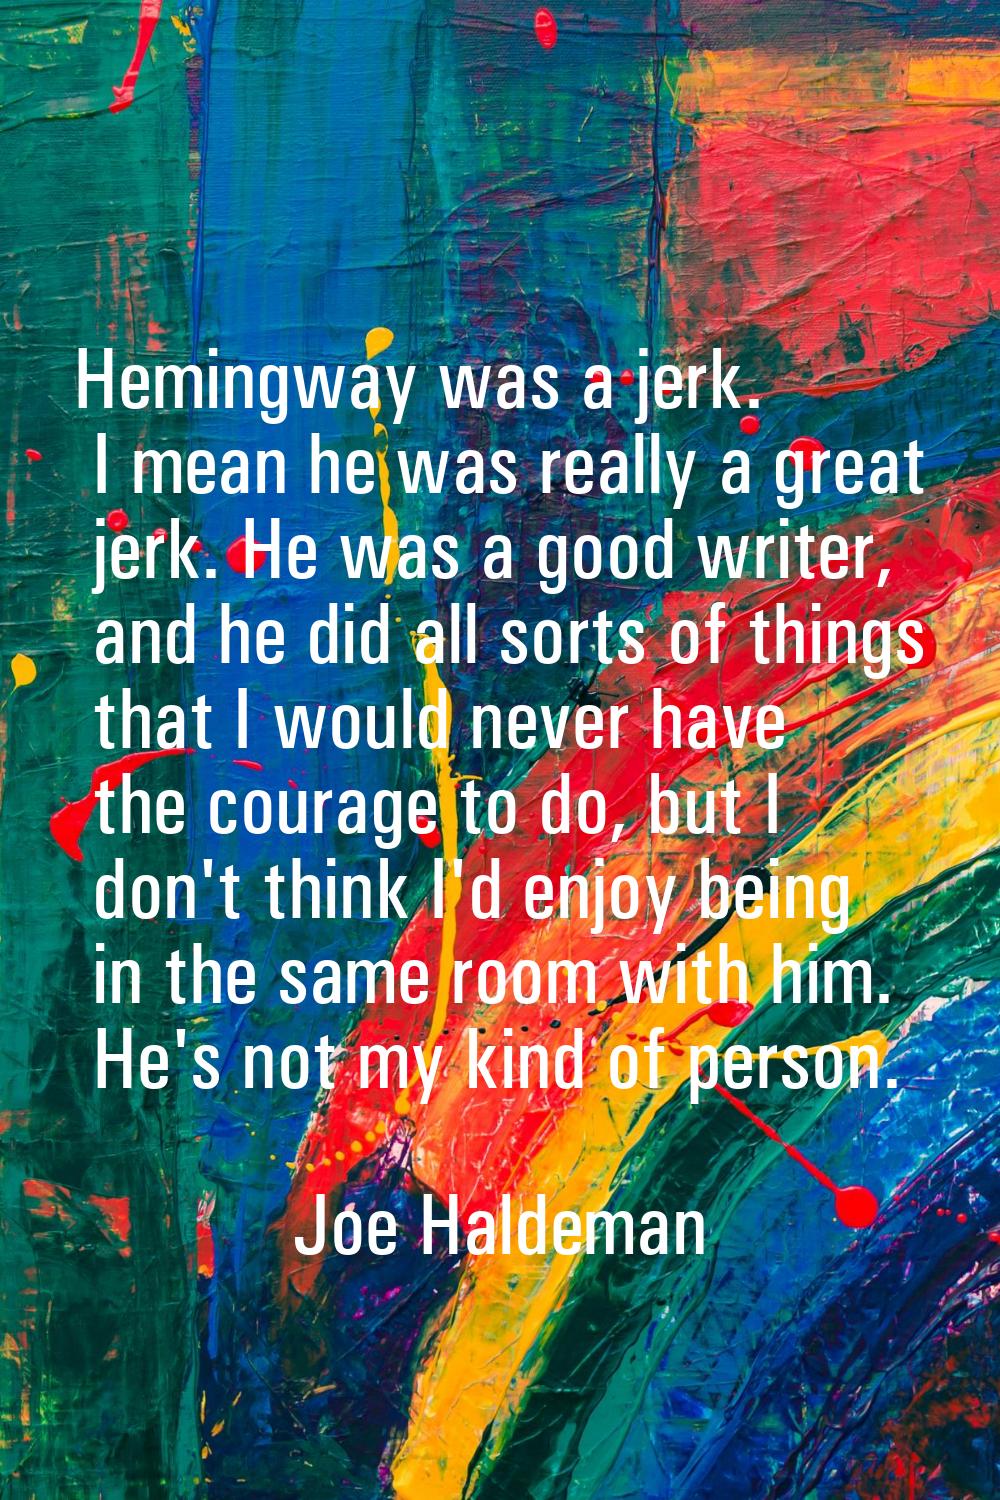 Hemingway was a jerk. I mean he was really a great jerk. He was a good writer, and he did all sorts